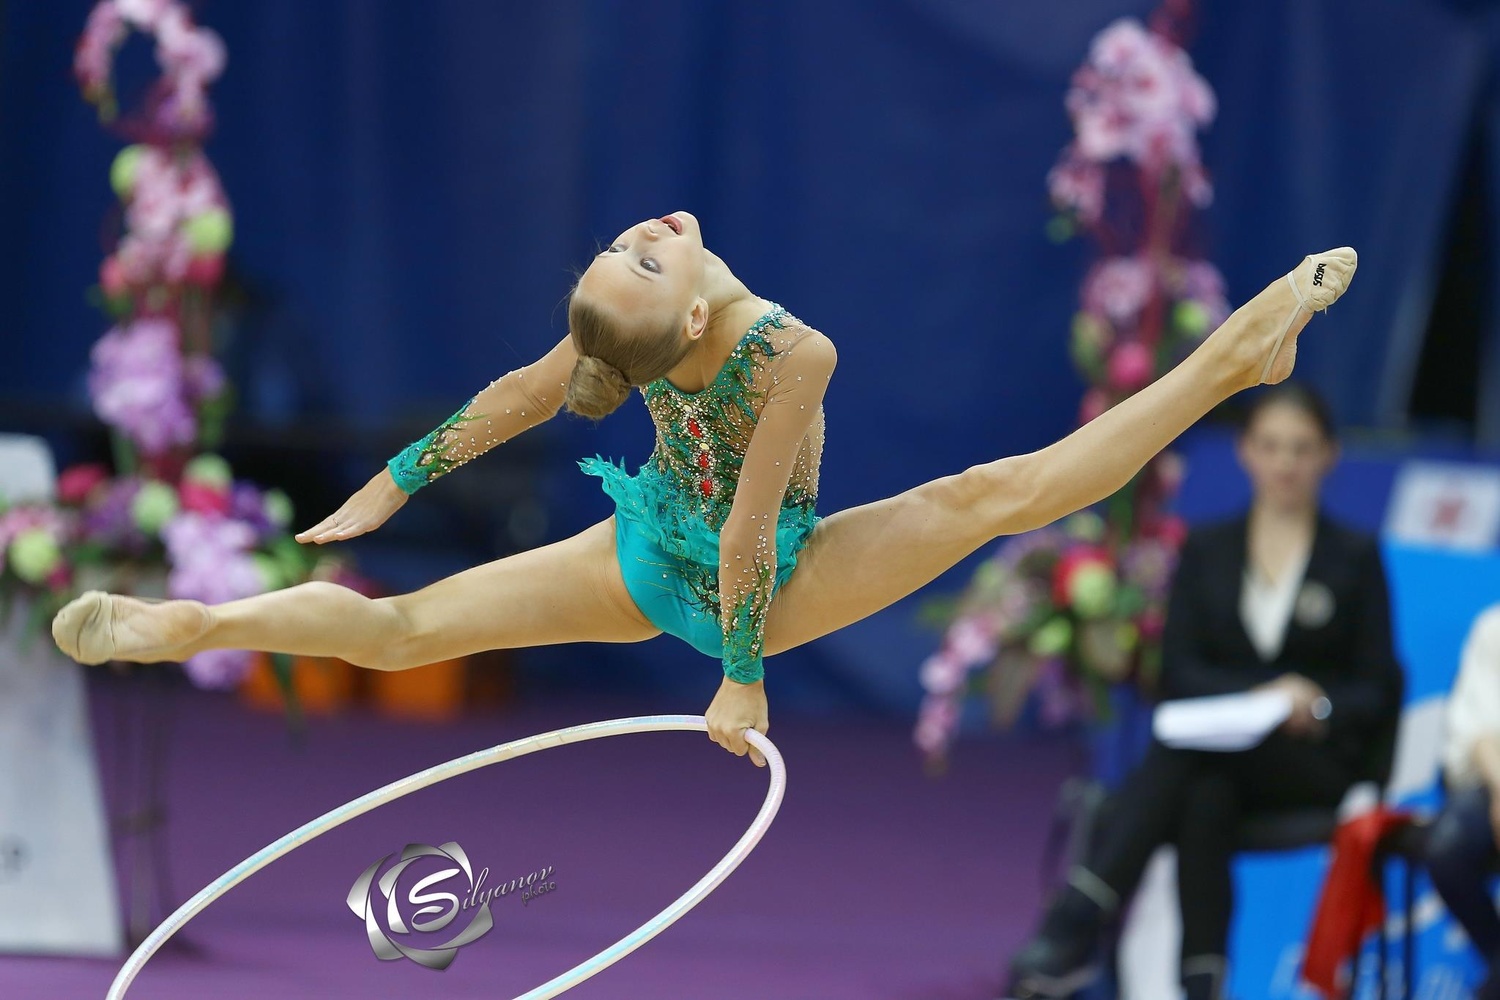 Grand Prix 2016 (Moscow)